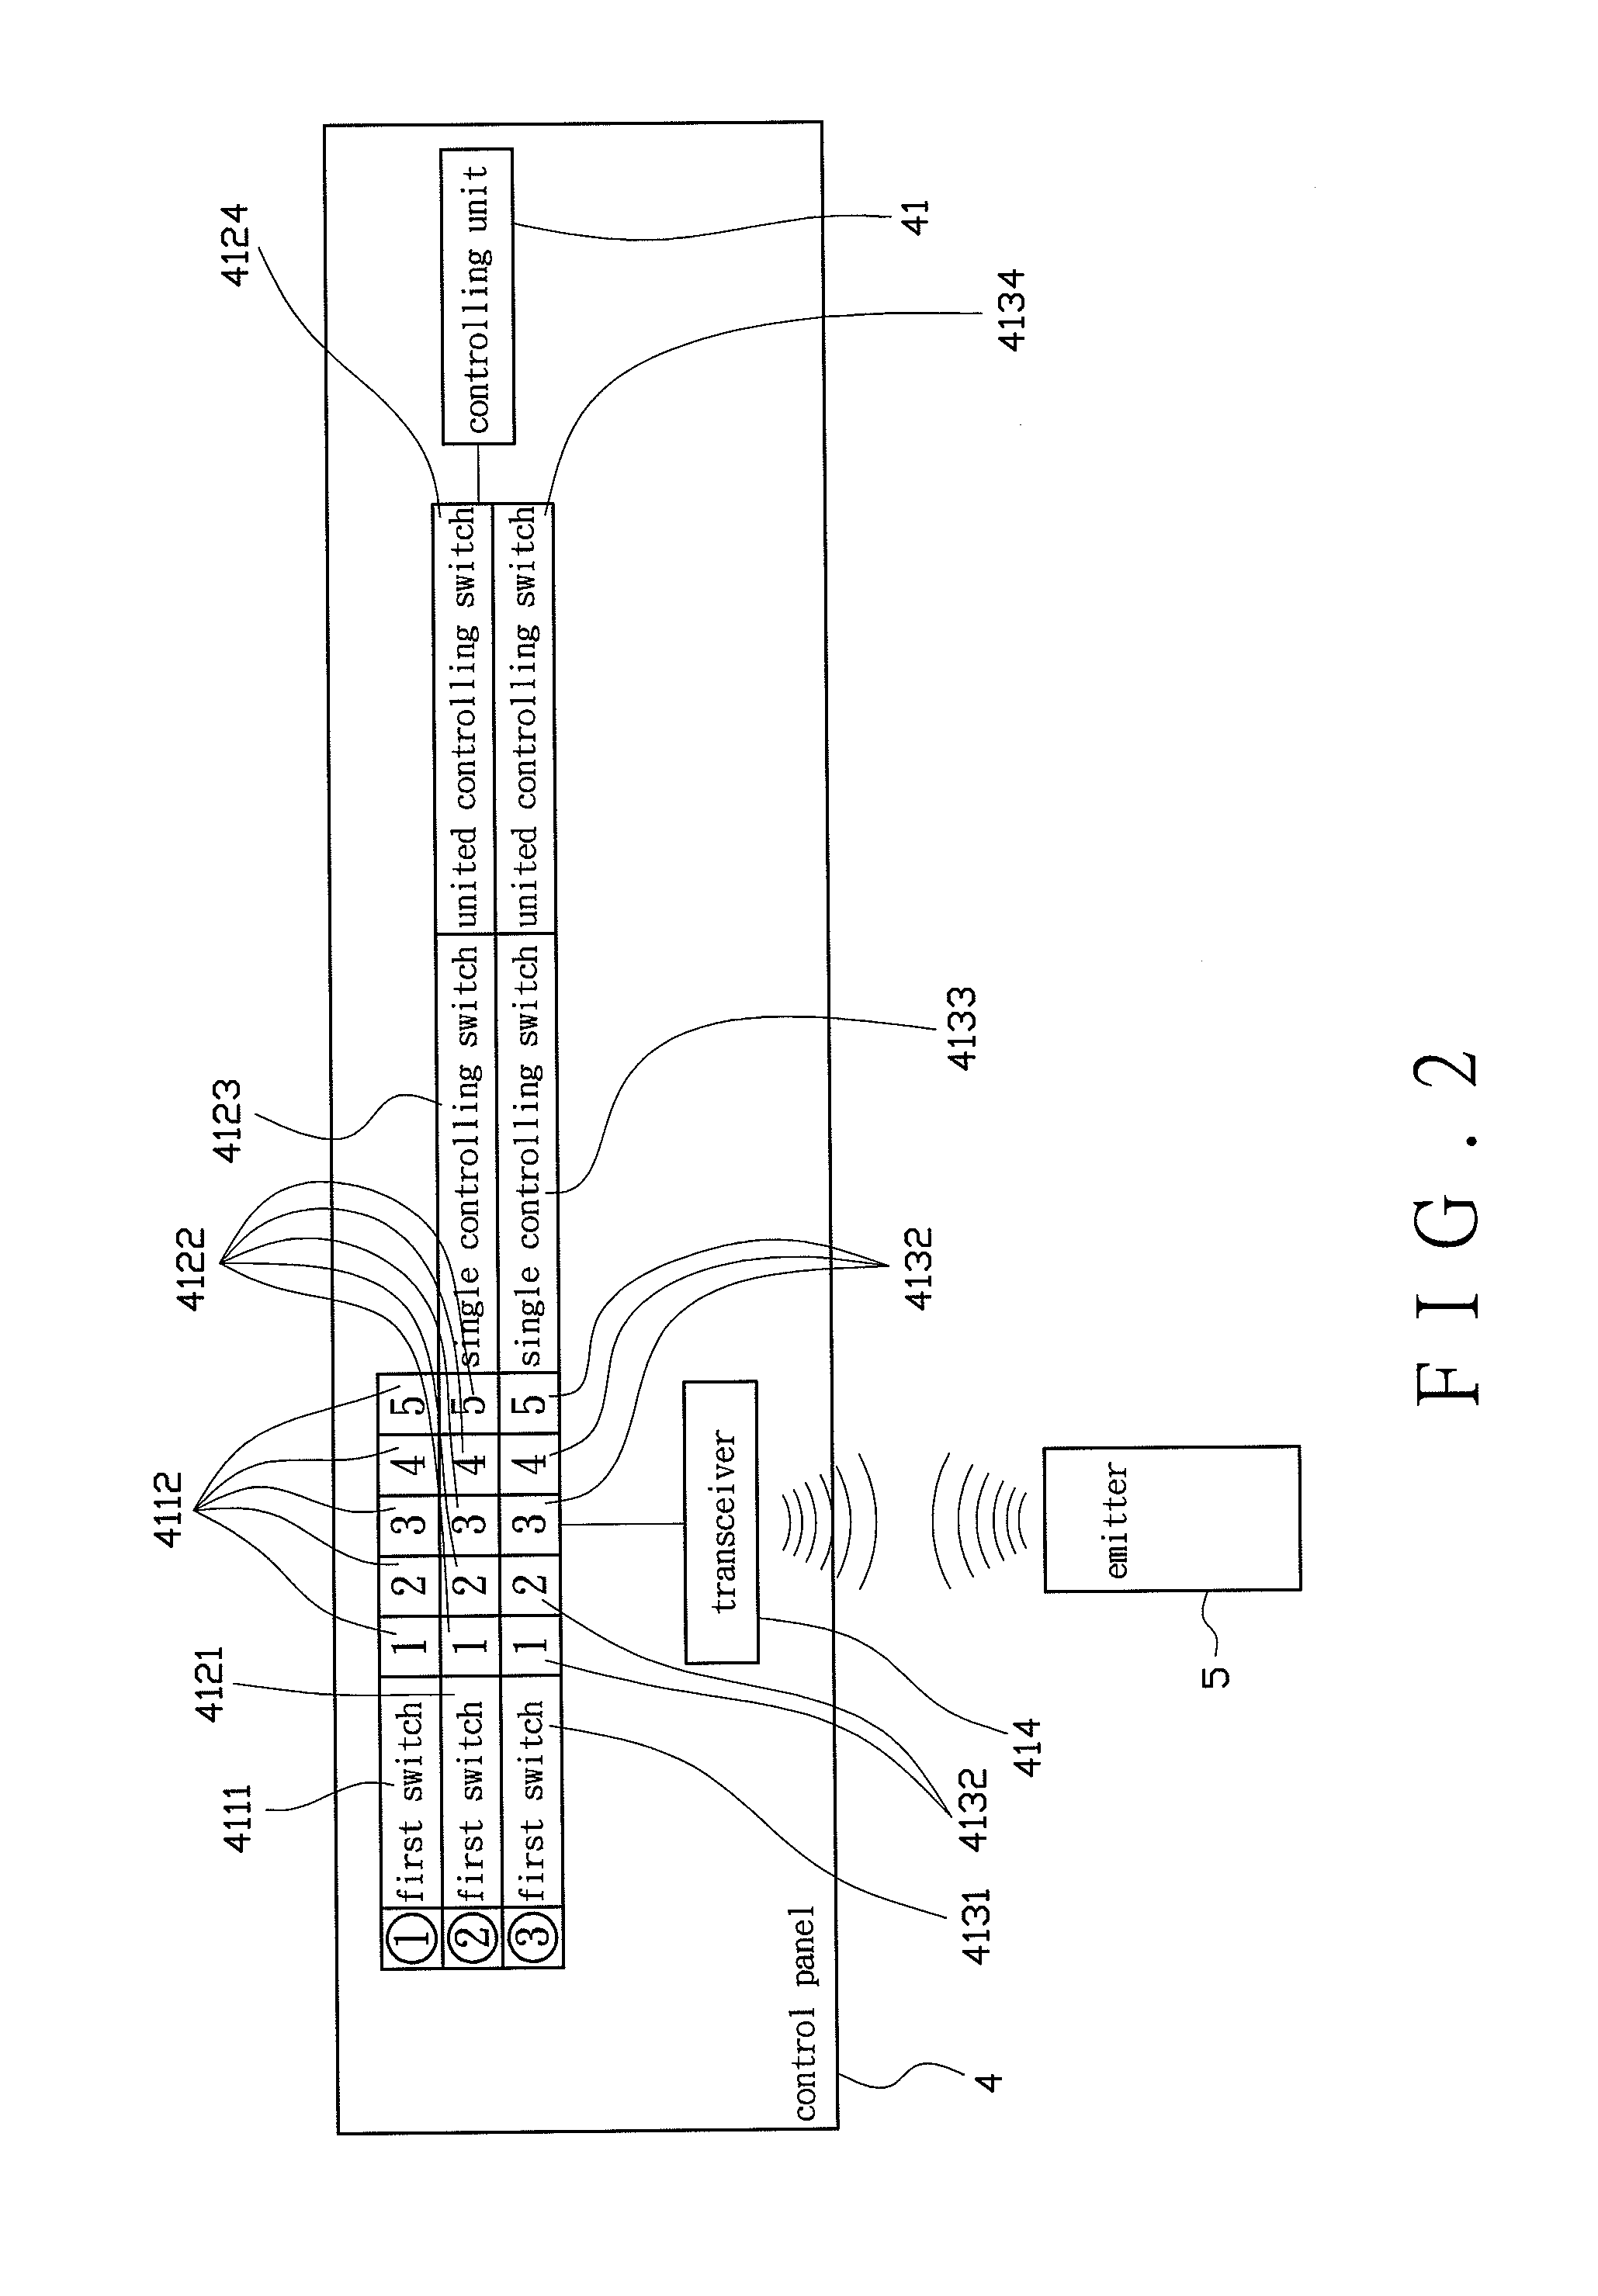 Split-type controlling device for producing oxygen and delivering air